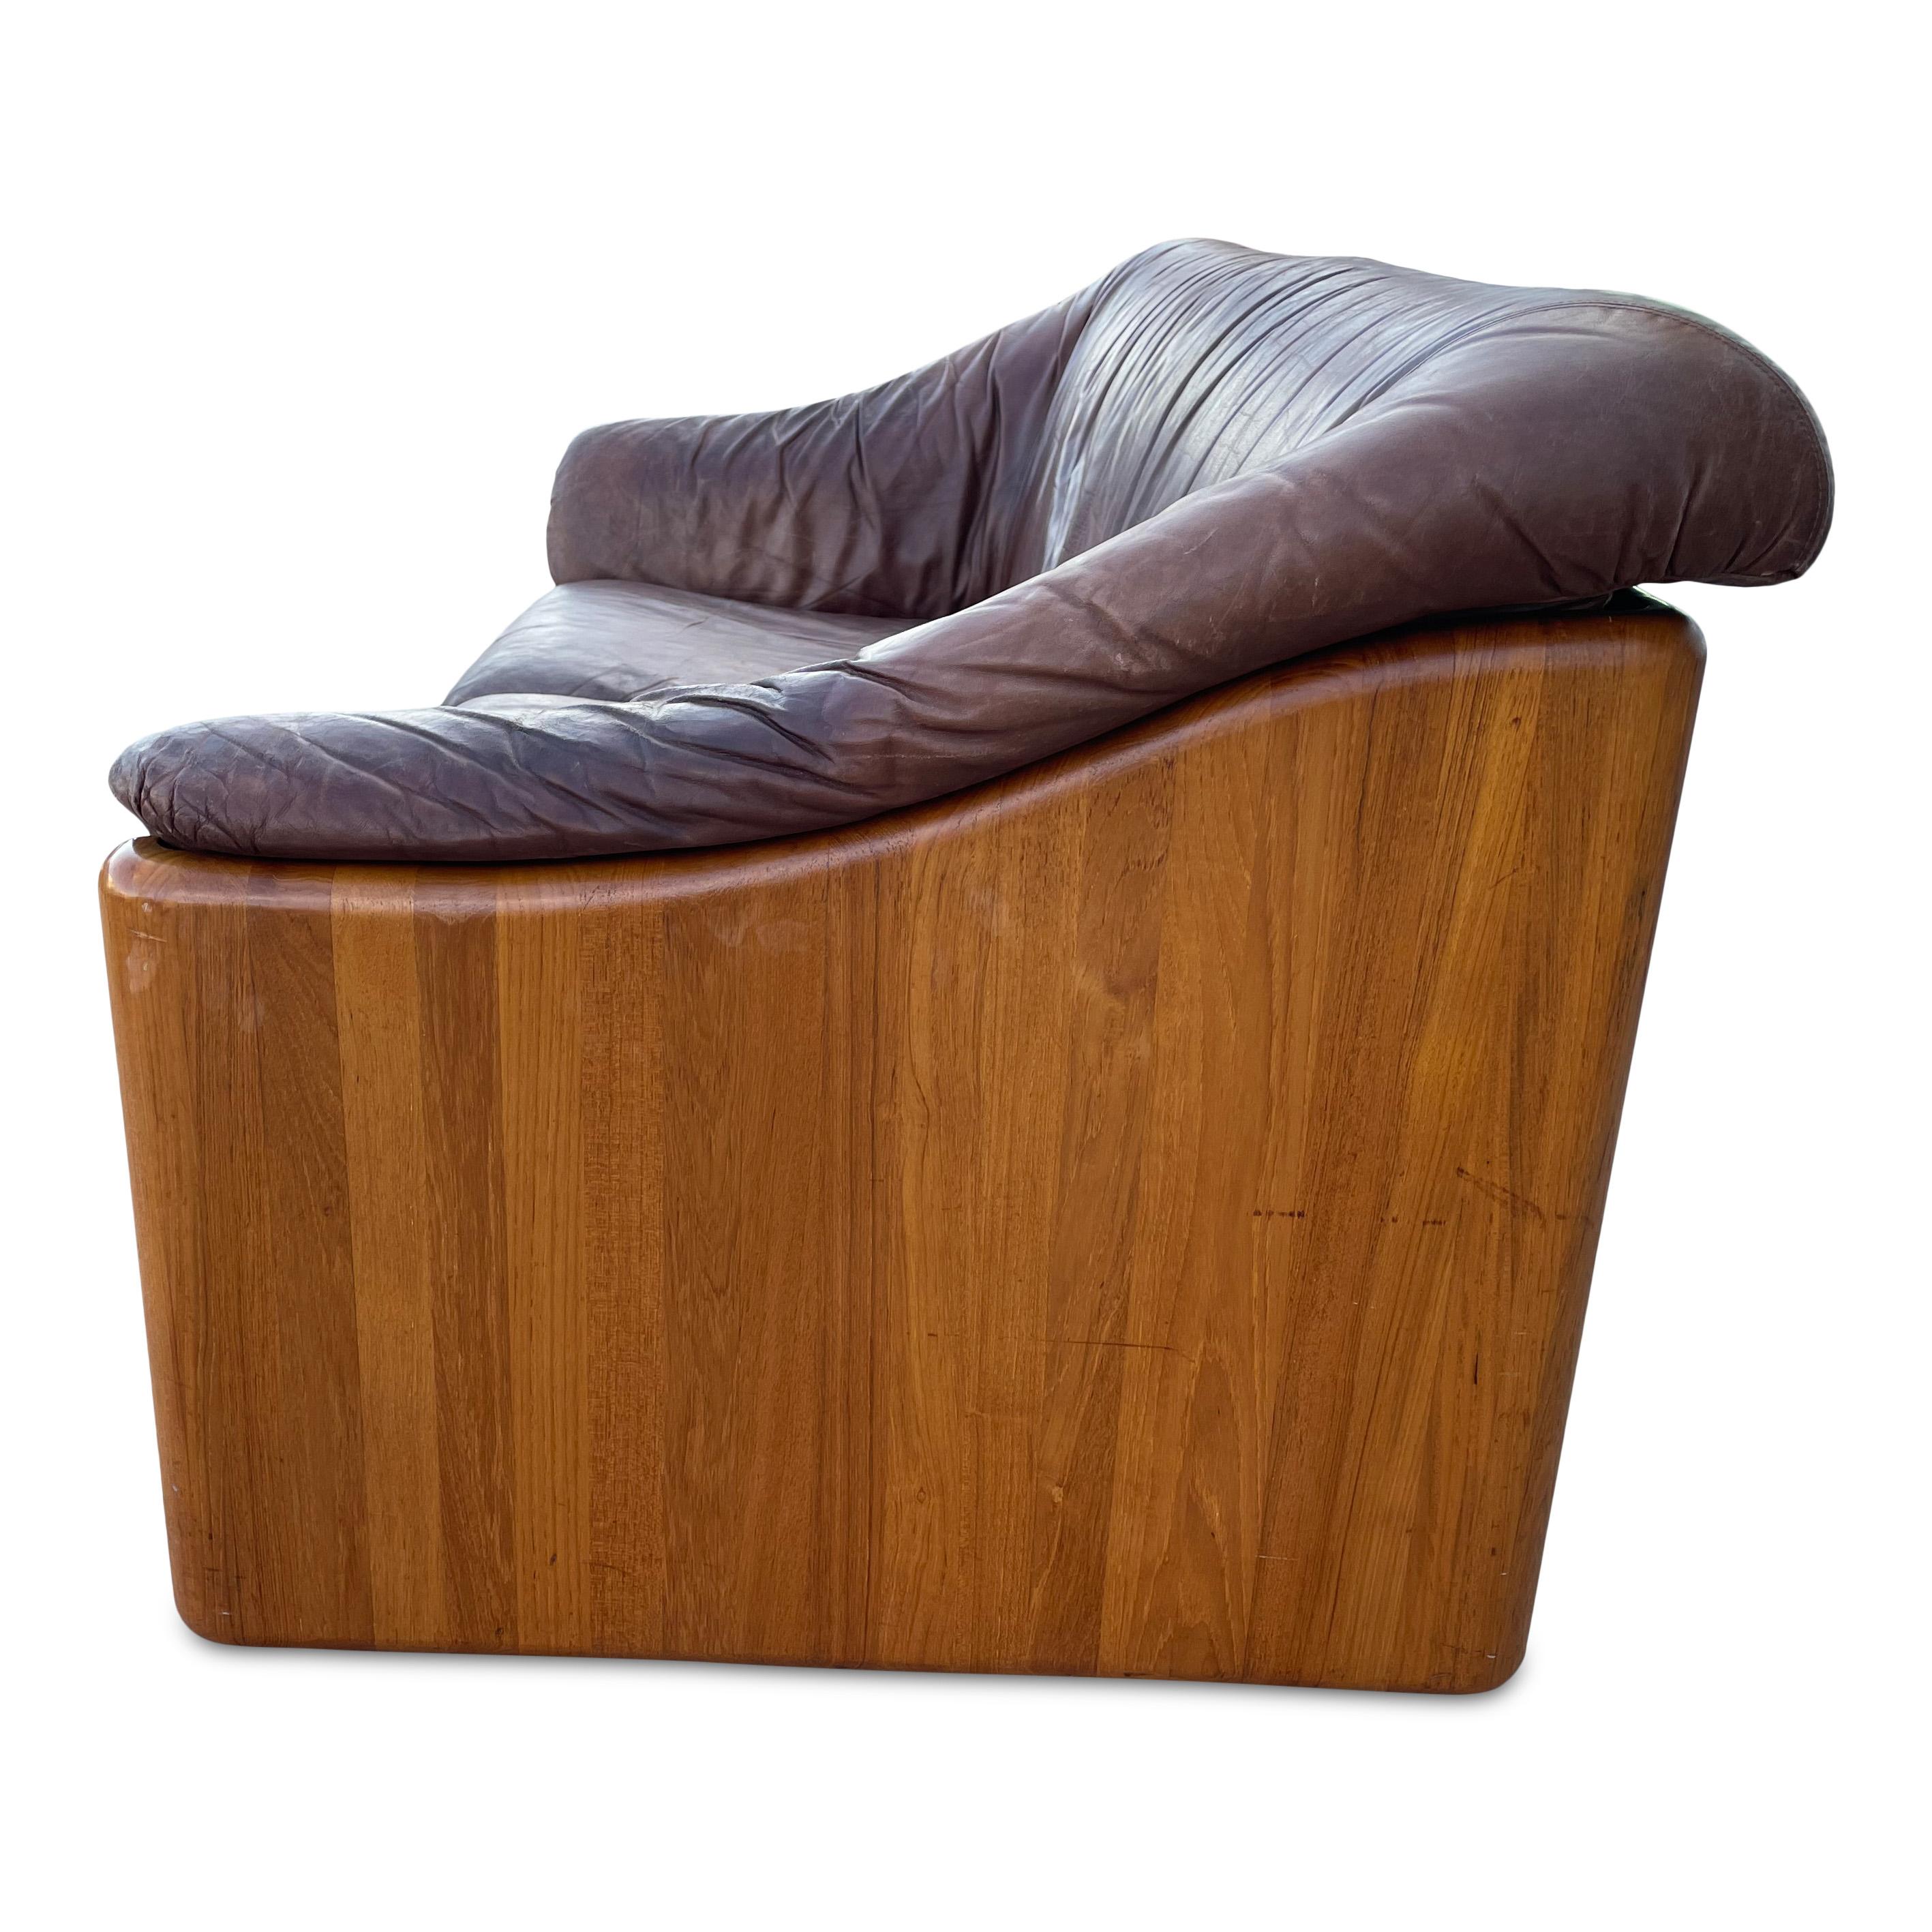 Classically Mid Century, perfect for a Frank-Lloyd Wright inspired home or as a warm vintage accent in a neutral space. Comfortable, warm and beautifully aged. 

Measures: 65